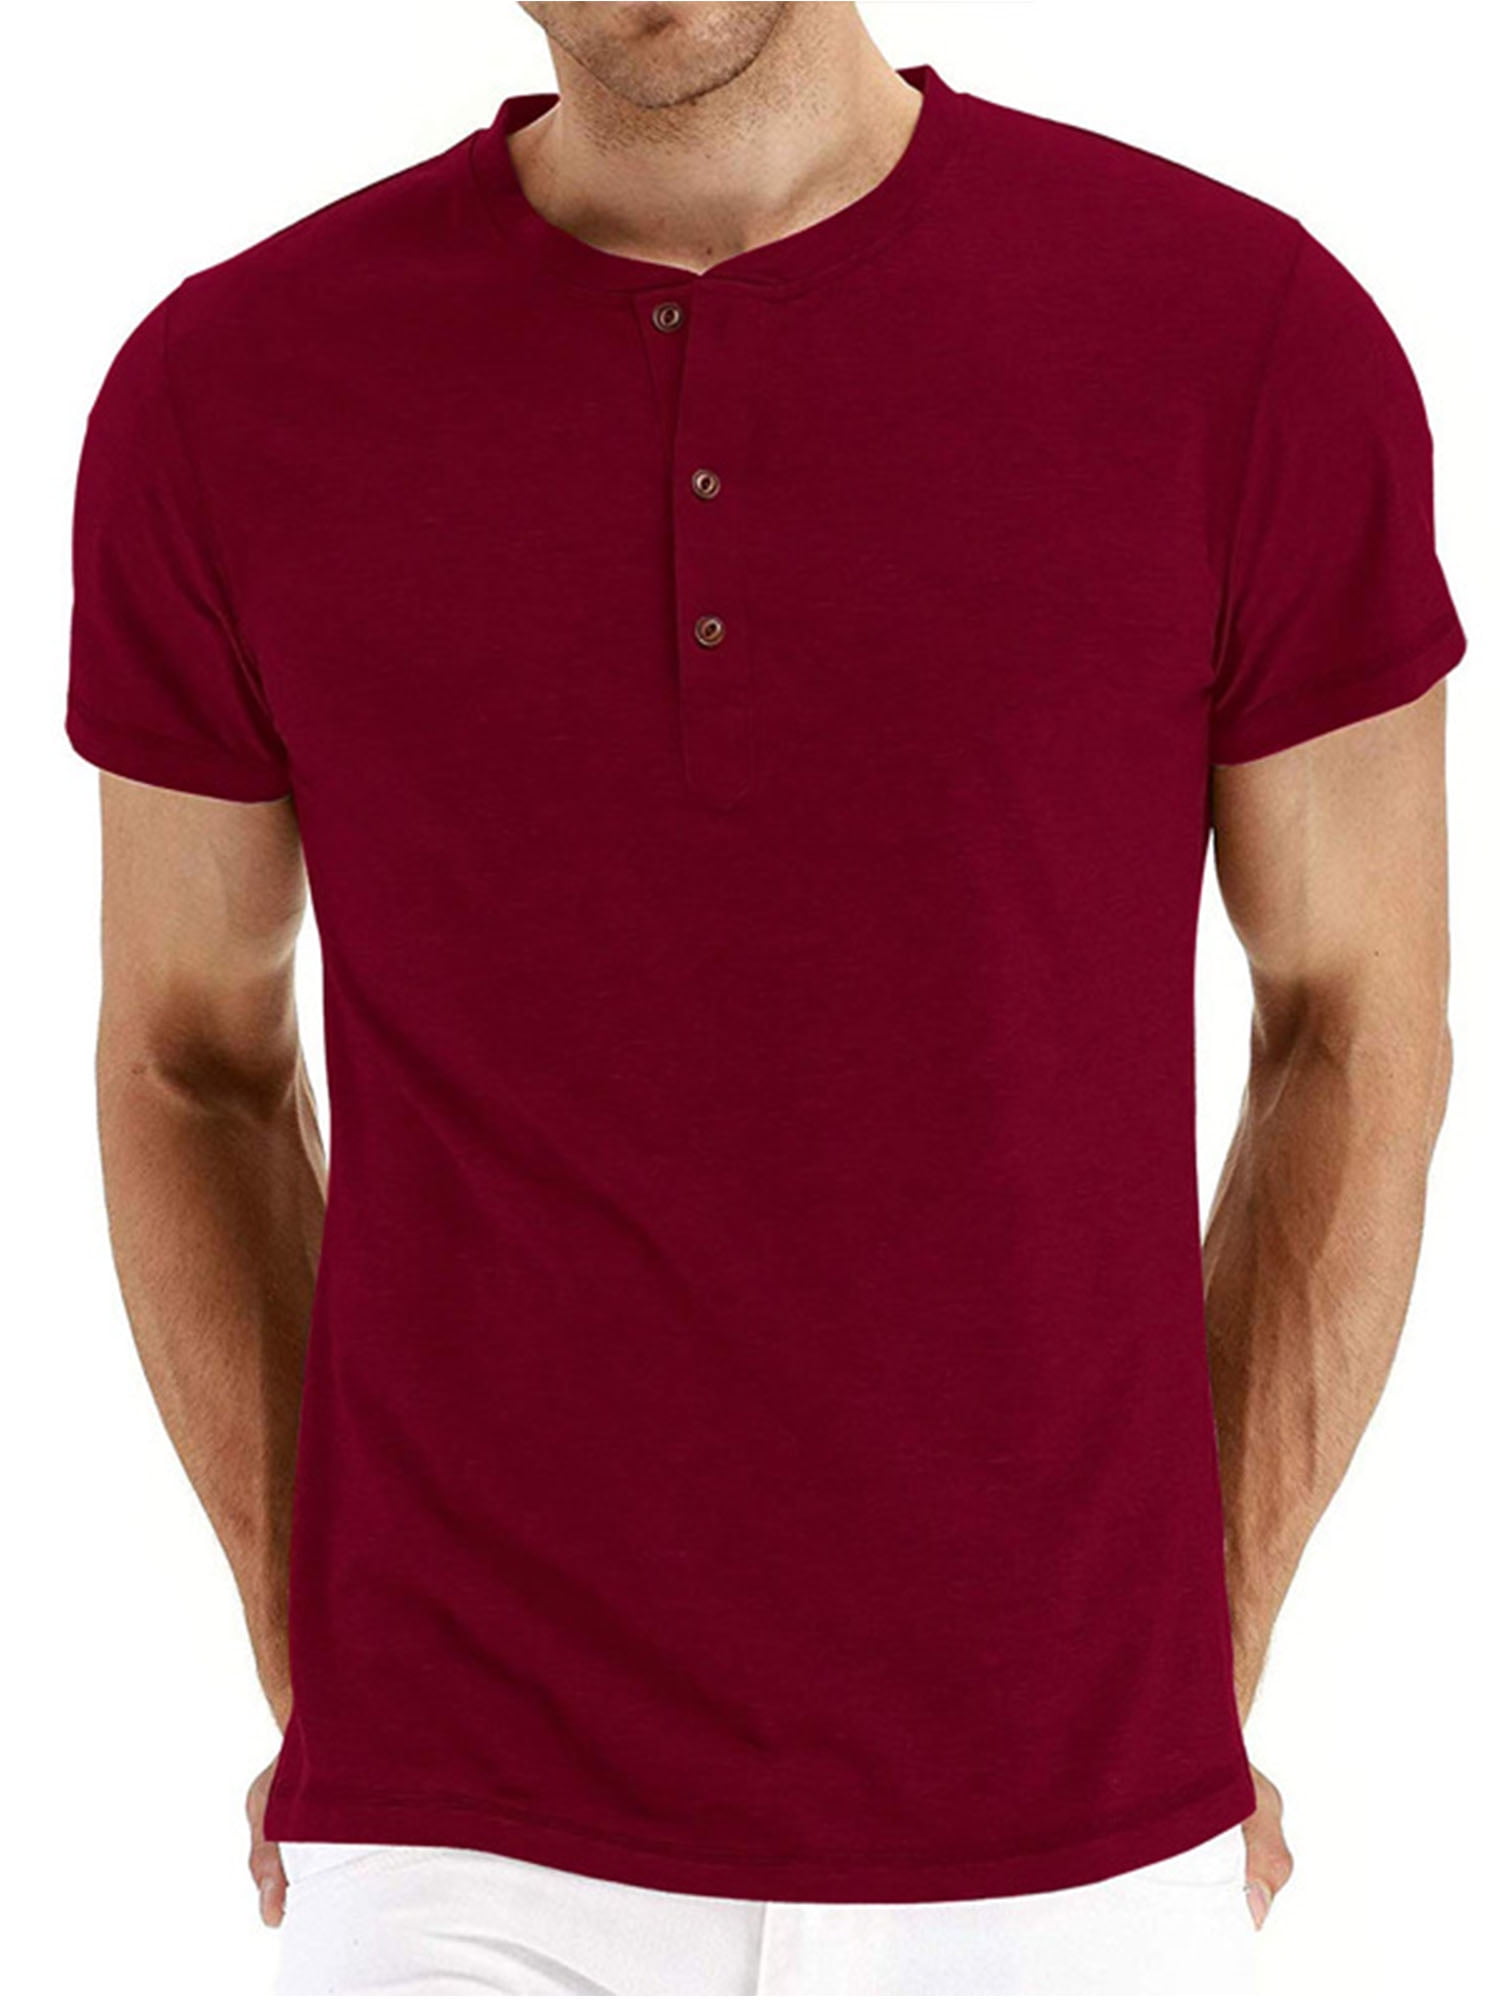 Forthery Men Casual Slim Fit Short Sleeve Henley T-Shirts V Neck Summer Tee Tops